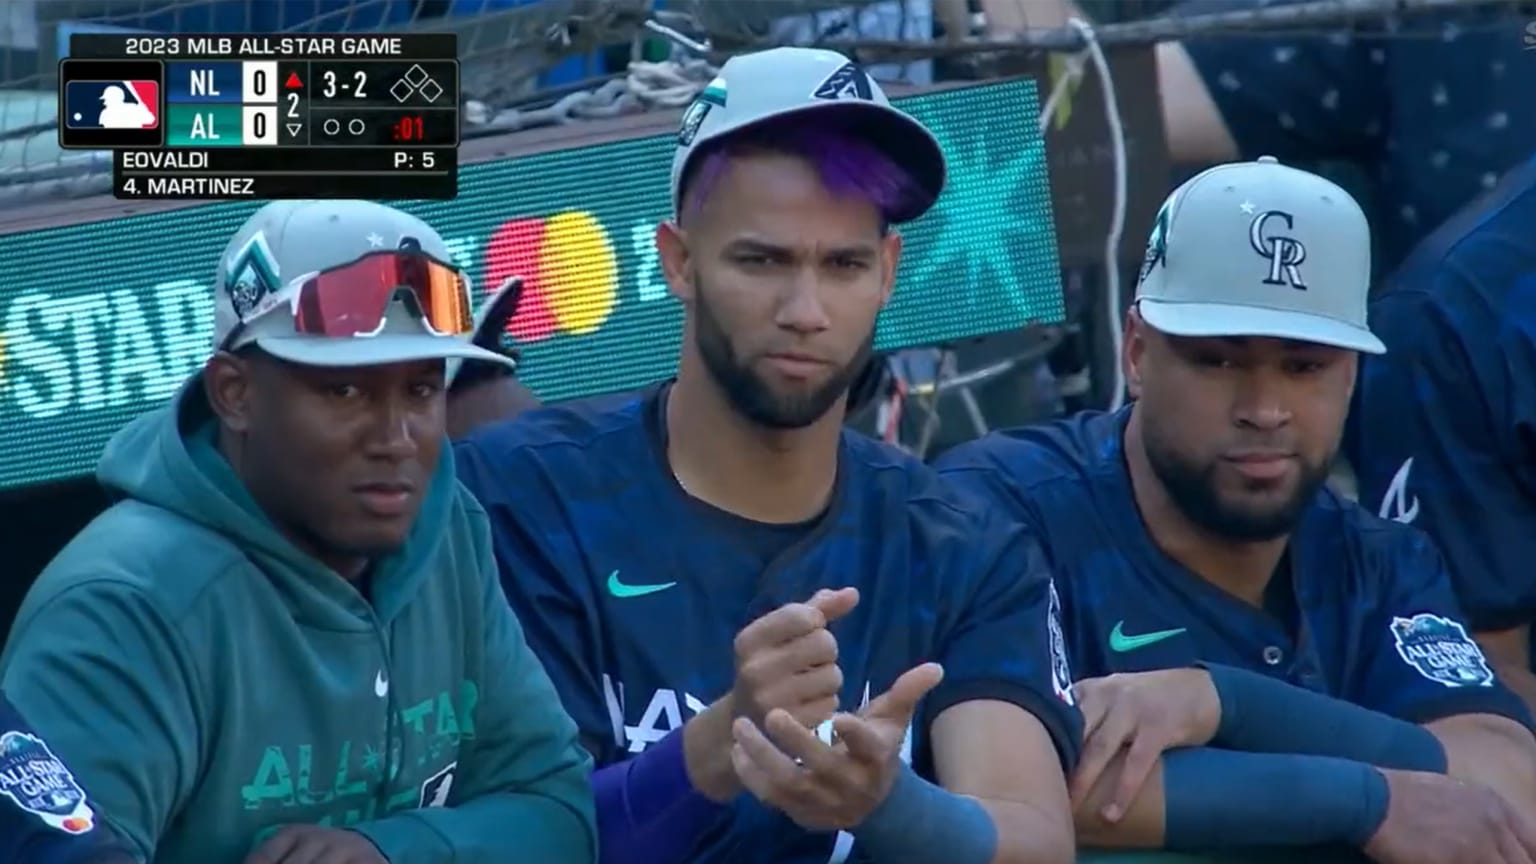 Lourdes Gurriel Jr. leans on the dugout railing with two All-Star teammates